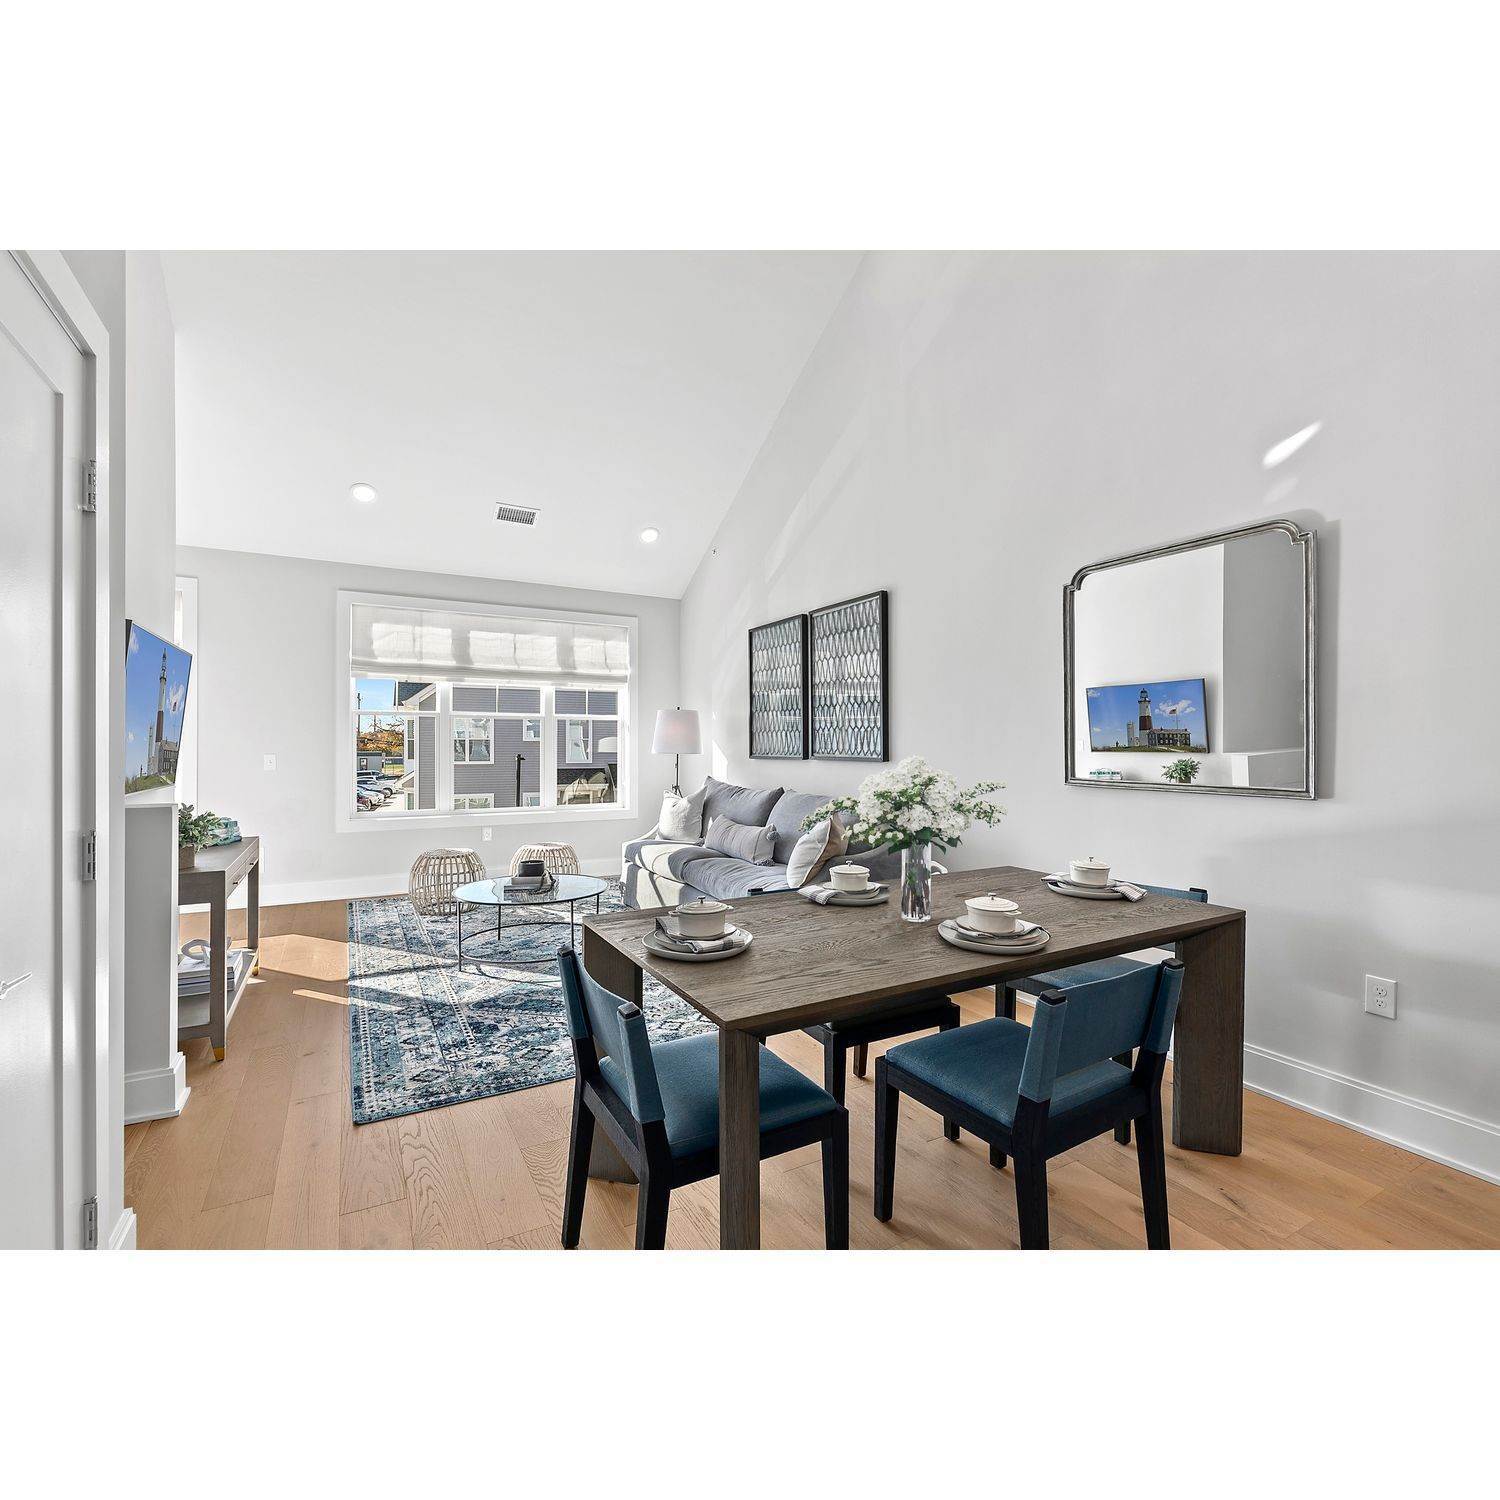 4. Meadowbrook Pointe East Meadow building at 123 Merrick Avenue, East Meadow, NY 11554